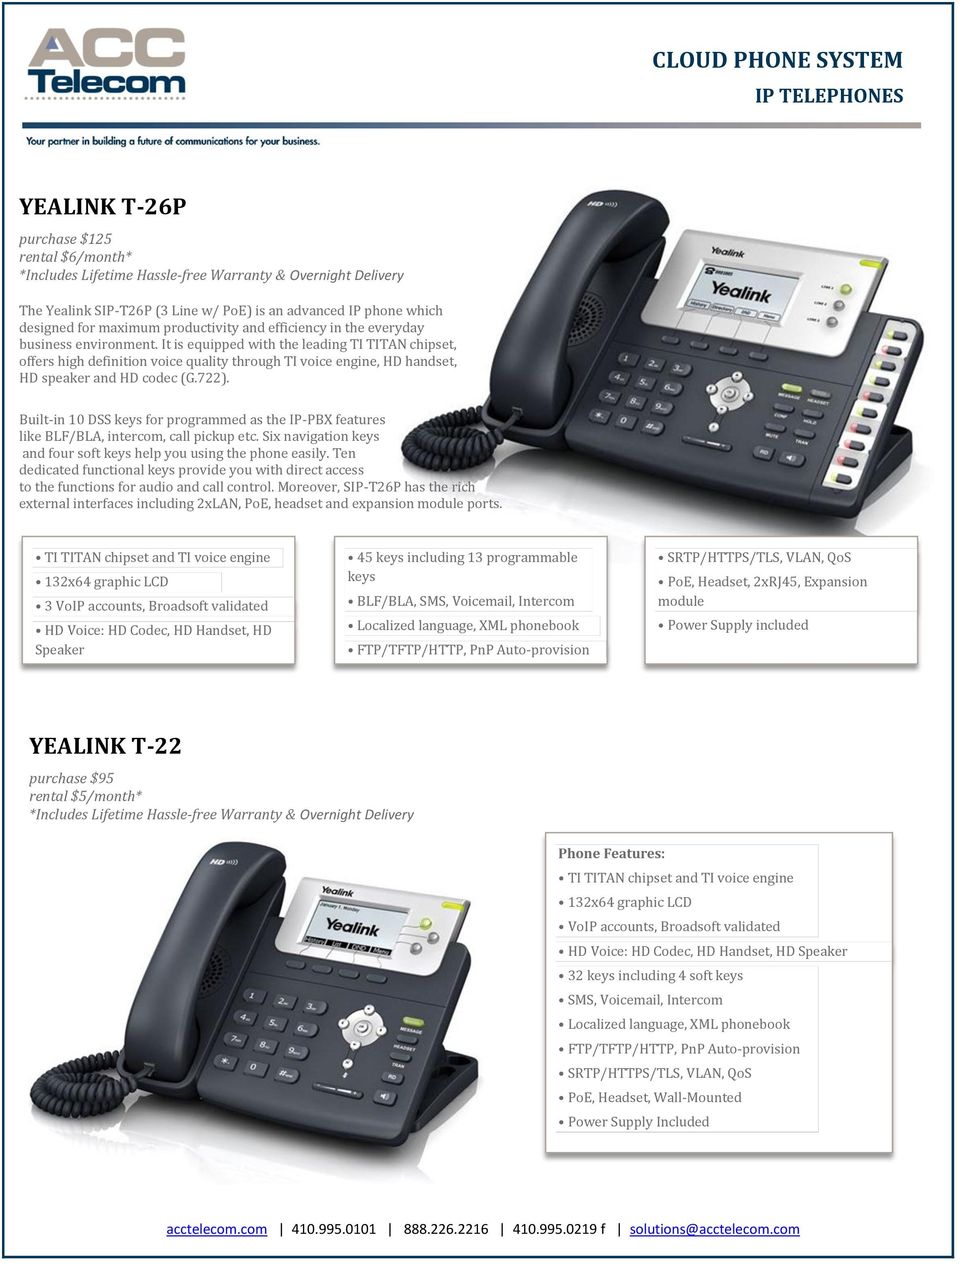 Built-in 10 DSS keys for programmed as the IP-PBX features like BLF/BLA, intercom, call pickup etc. Six navigation keys and four soft keys help you using the phone easily.